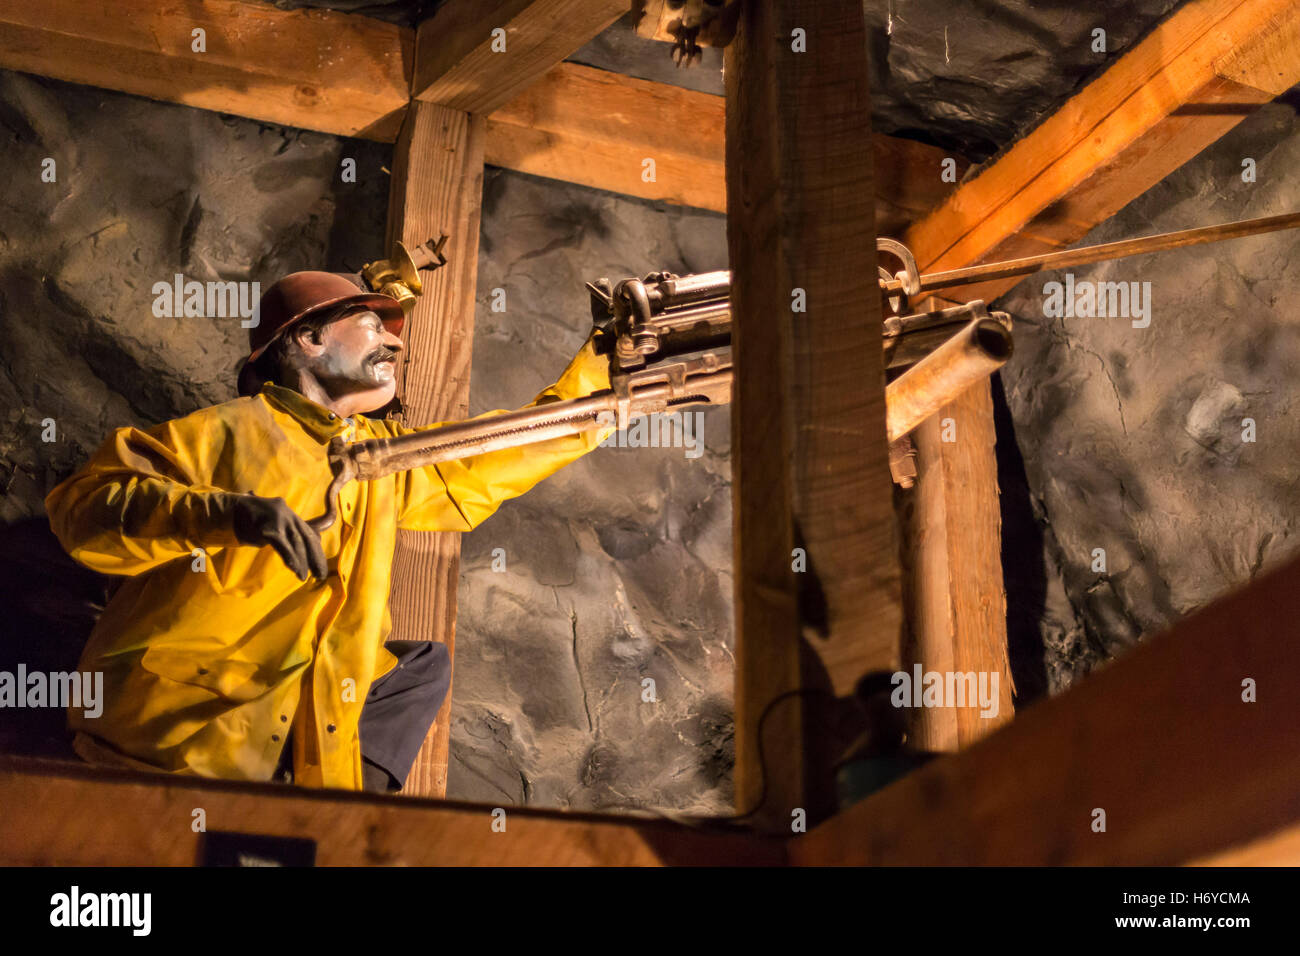 Leadville, Colorado - The National Mining Hall of Fame and Museum. A display shows a miner with a hand-operated drill. Stock Photo